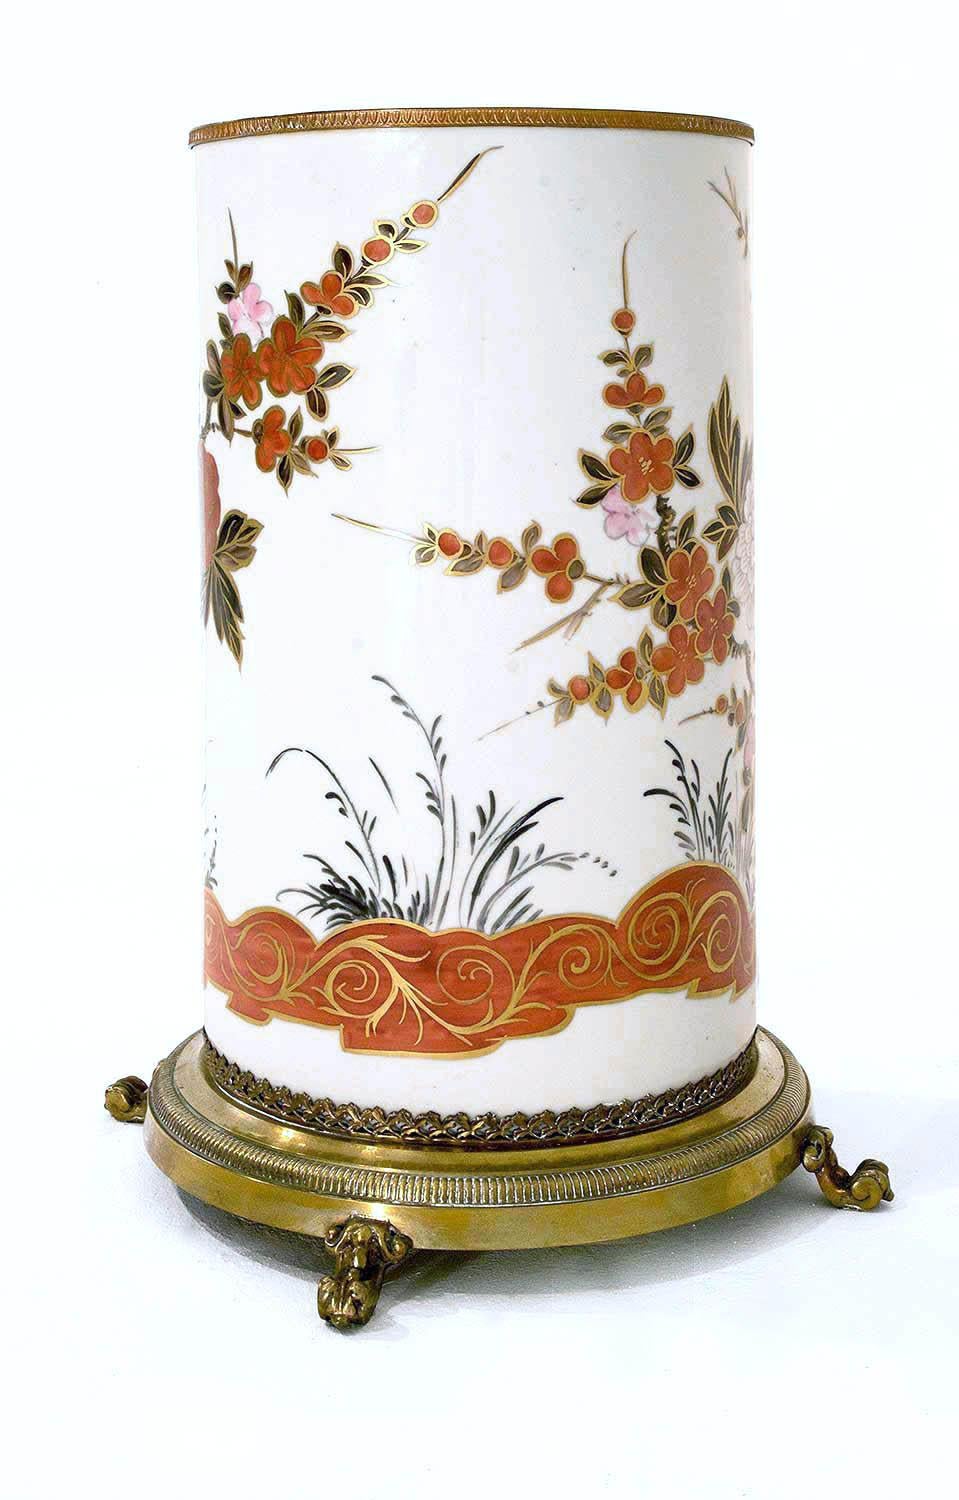 Cylindrical polychrome porcelain umbrella holder on a white background decorated with birds, leaves and branches, golden highlights, orange and rose peonies and flowers. Gilt bronze mount with a circular base, standing on three scrolled legs and